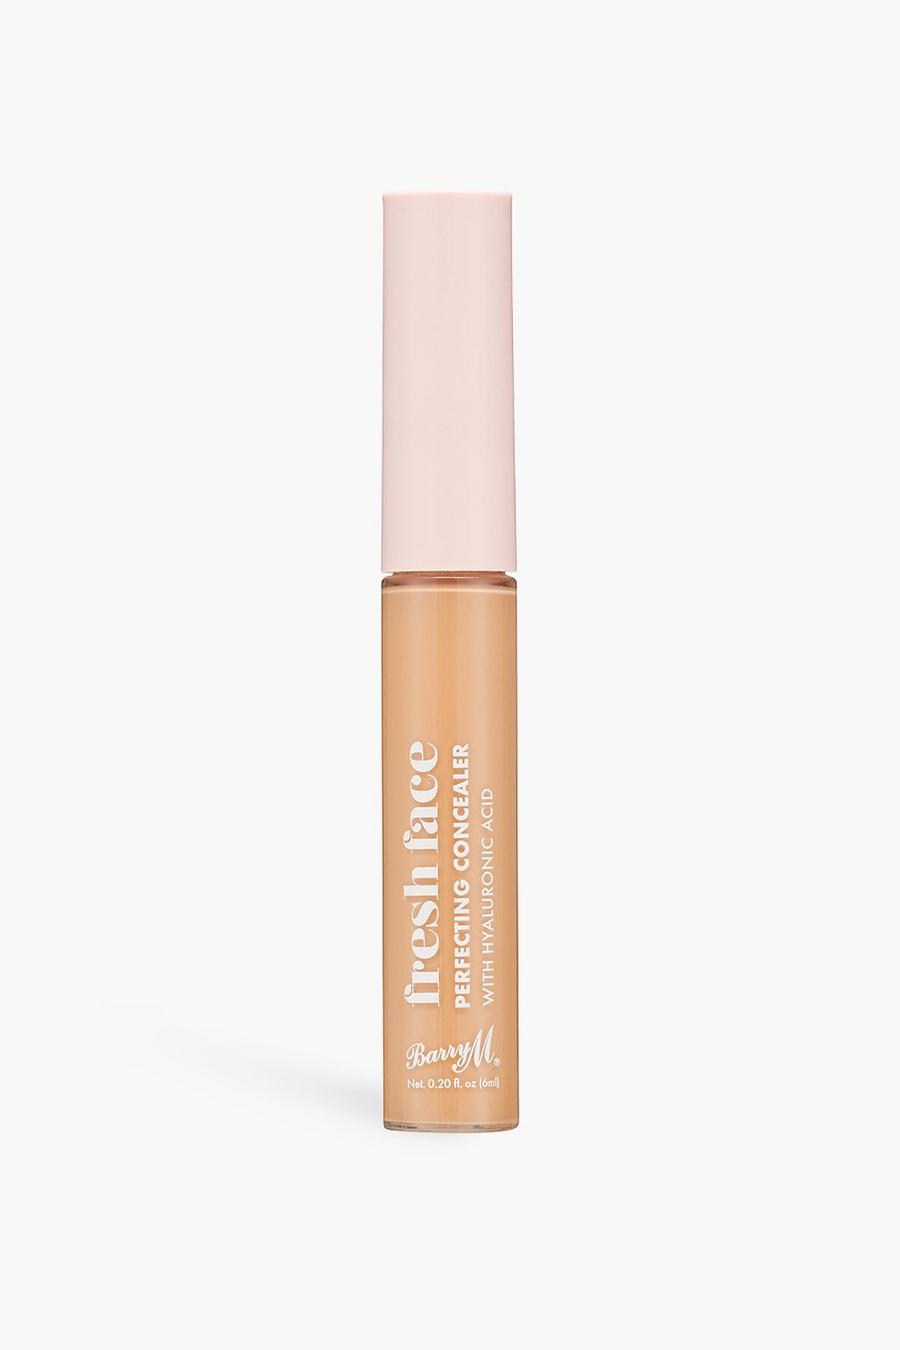 Tan brun Barry M Fresh Face Perfecting Concealer 7